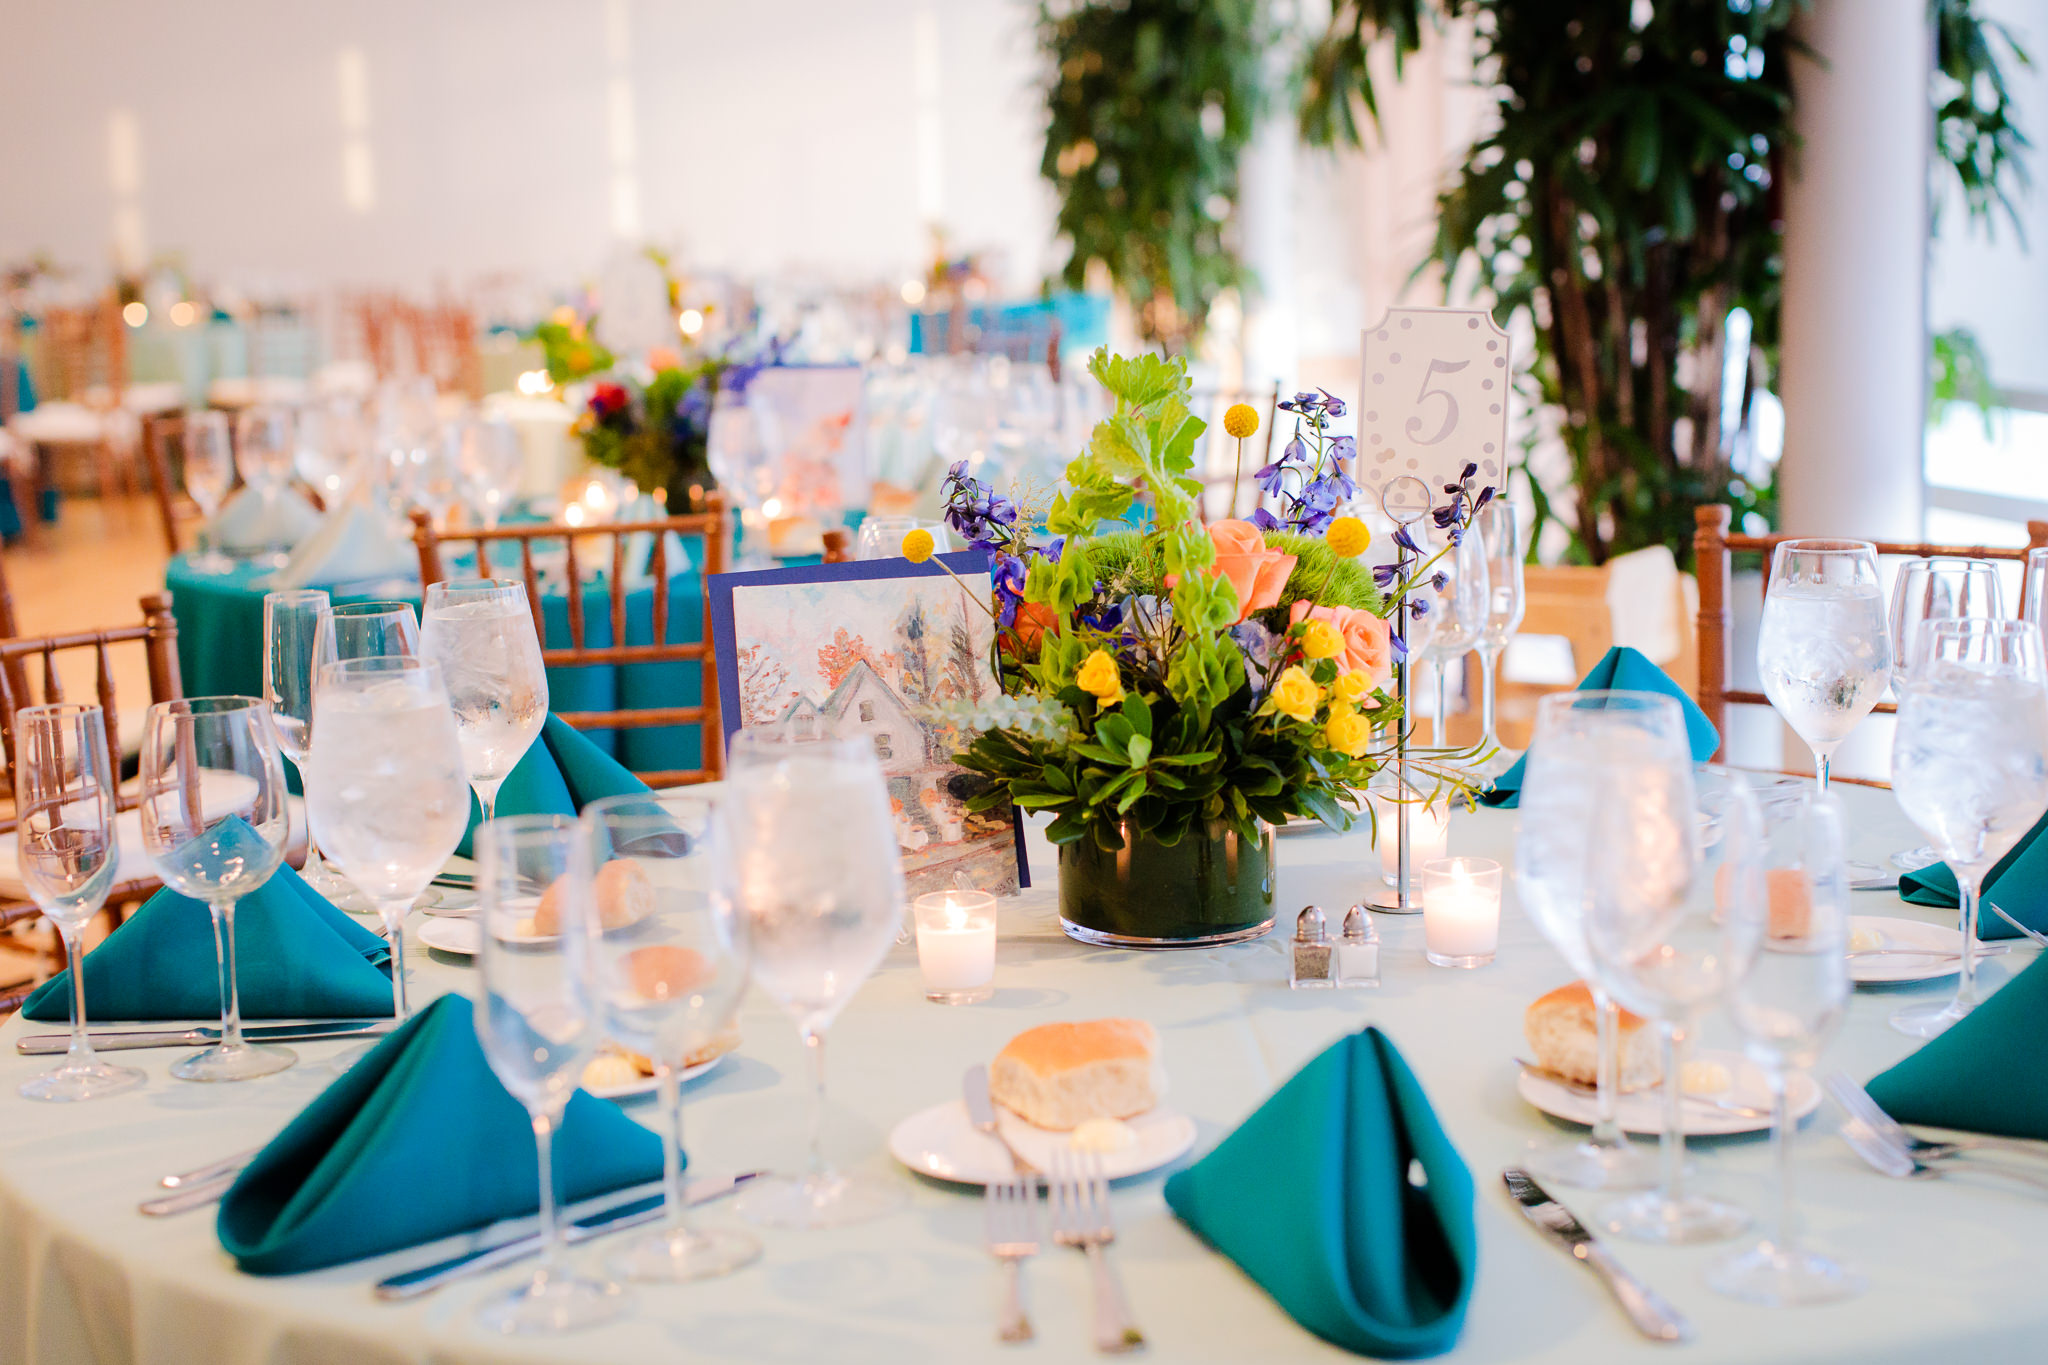 Tables set with turquoise linens and floral centerpieces at Phipps Conservatory